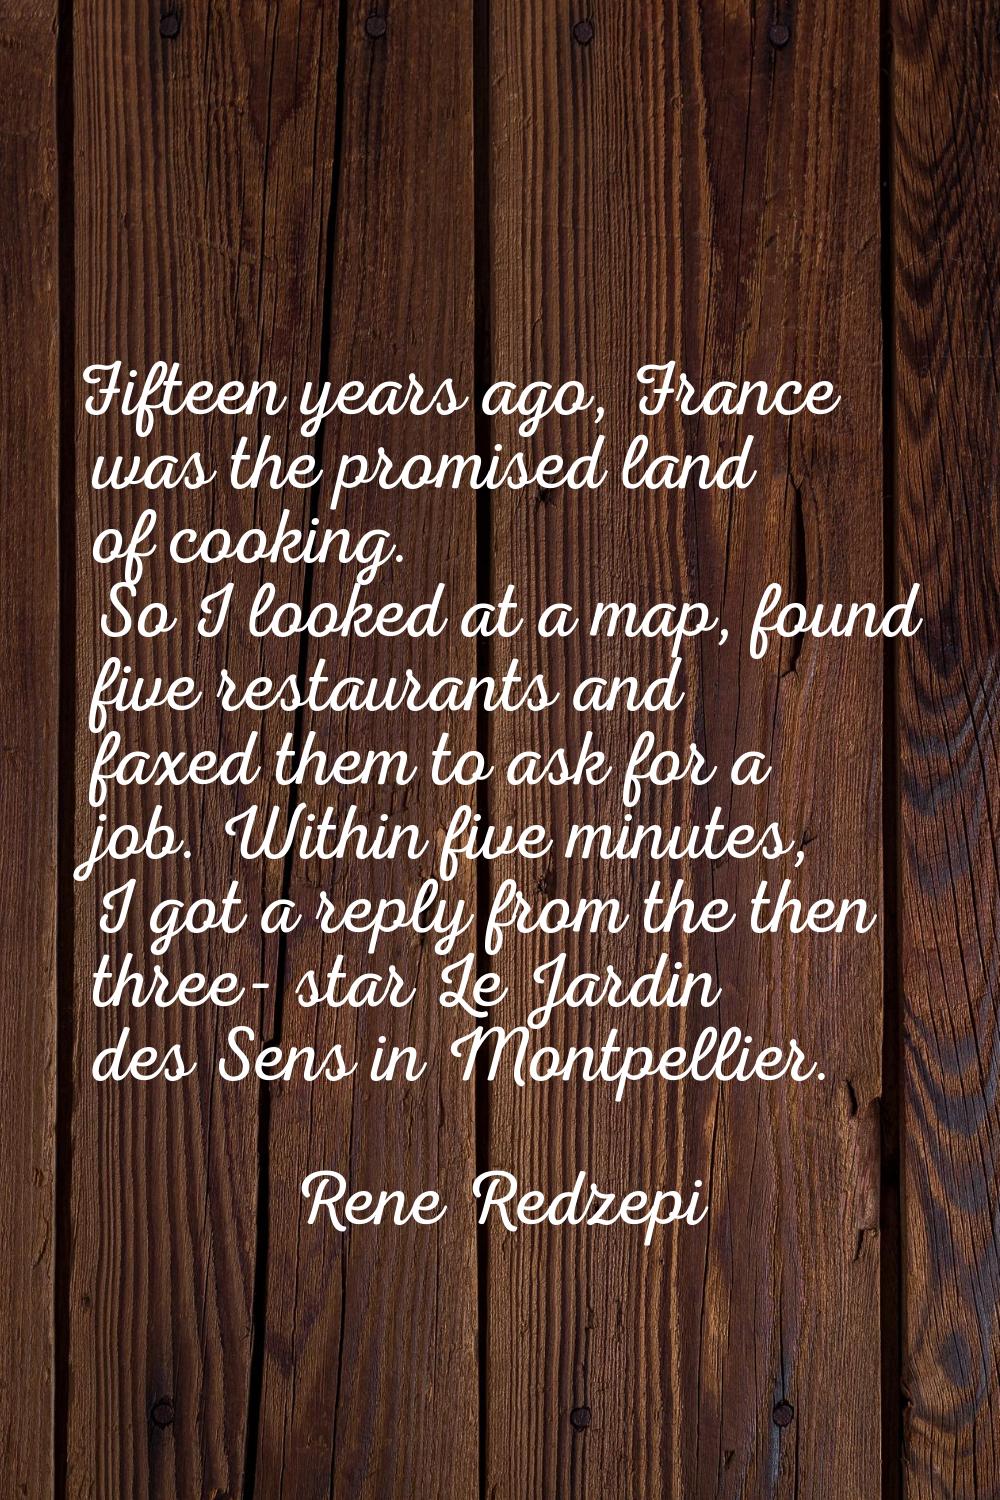 Fifteen years ago, France was the promised land of cooking. So I looked at a map, found five restau